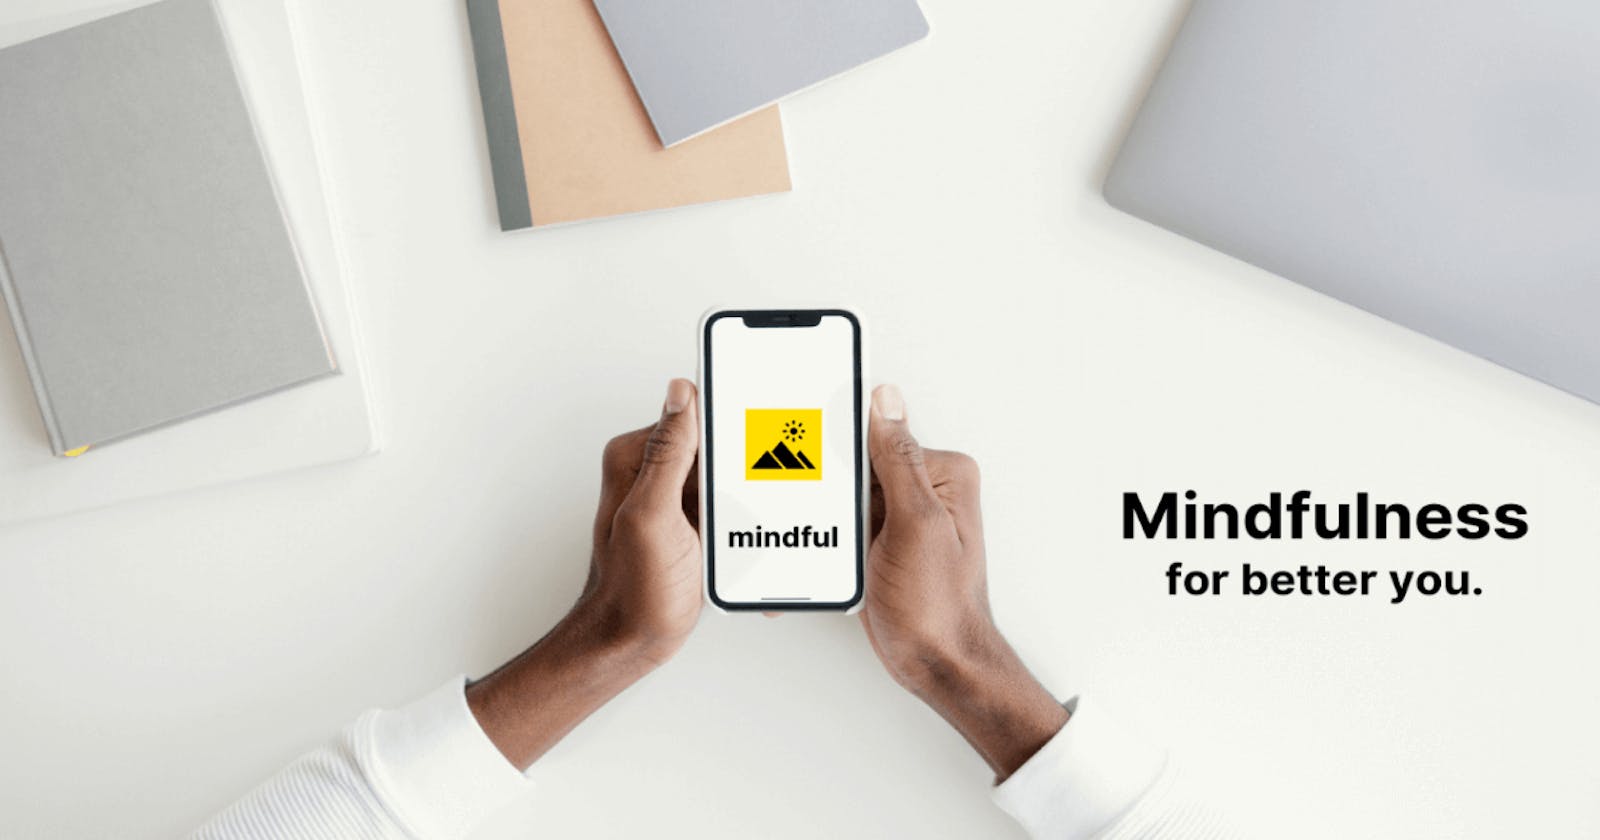 Mindful - Mindfulness For Better You